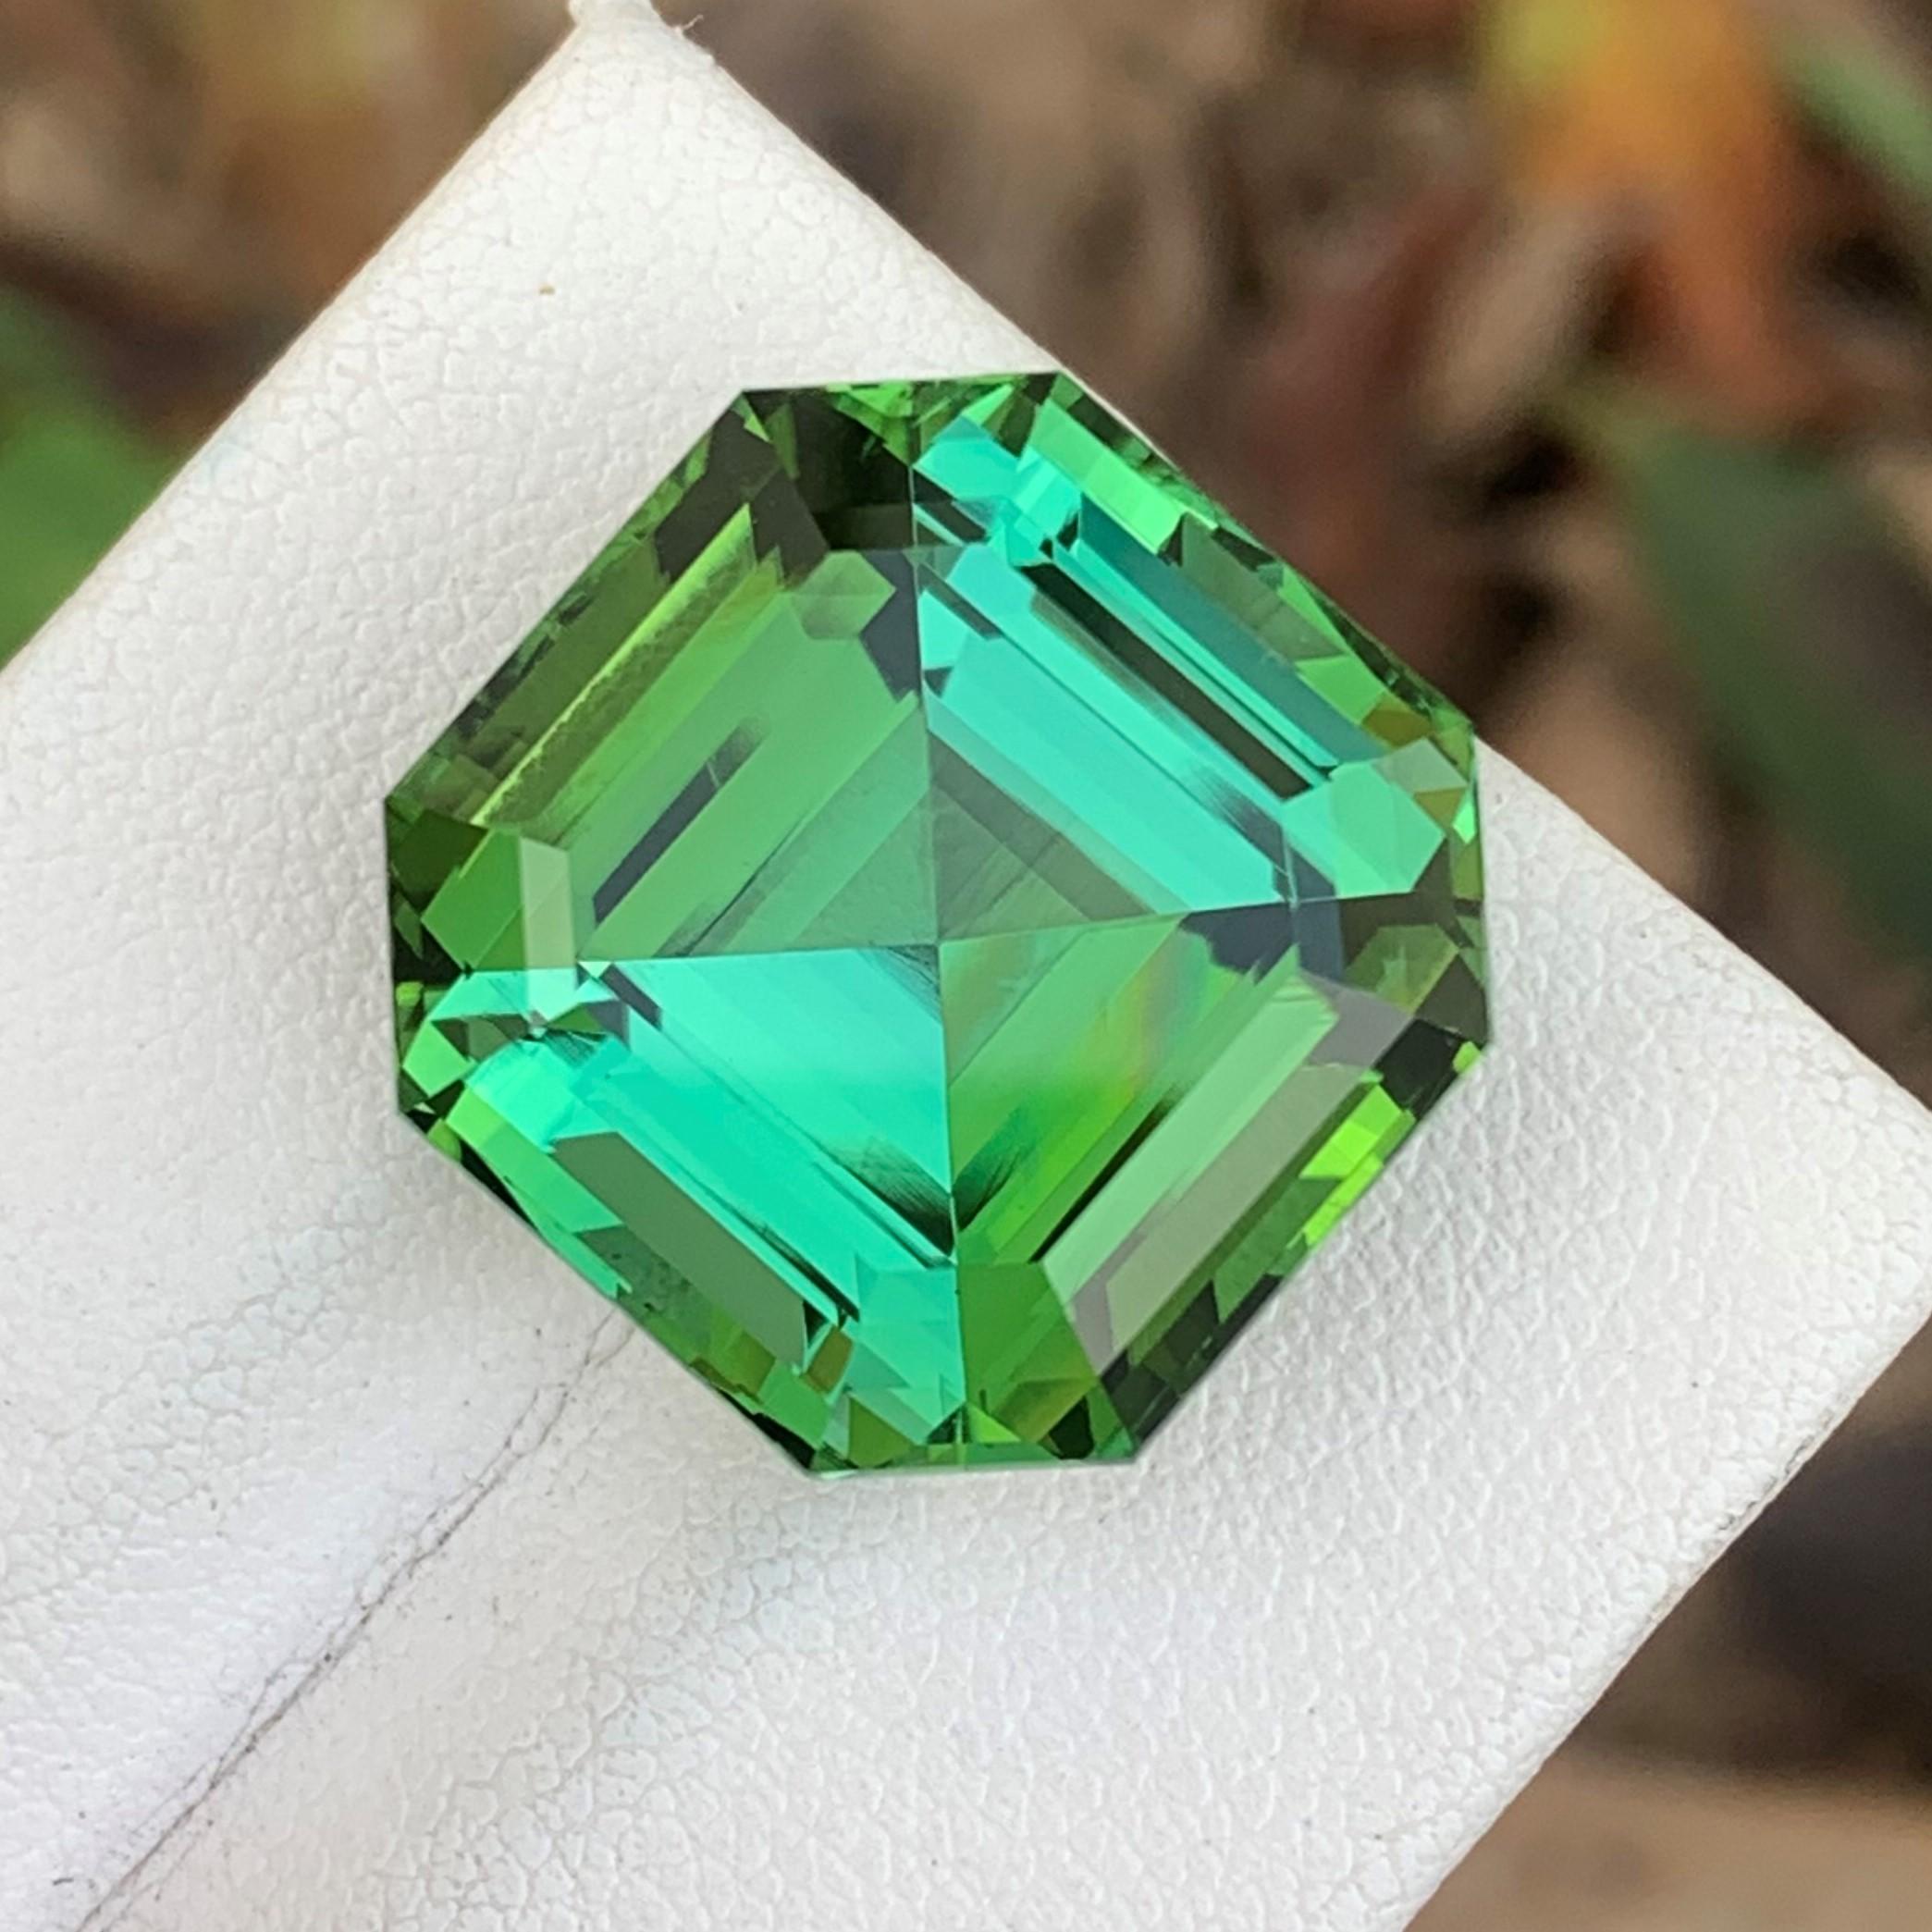 Gemstone Type : Tourmaline
Weight : 24.20 Carats
Dimensions : 16.9x16.9x12.1 Mm
Origin : Kunar Afghanistan
Clarity : Eye Clean
Shape: Asscher Cut
Color: Mintgreen
Certificate: On Demand
Basically, mint tourmalines are tourmalines with pastel hues of